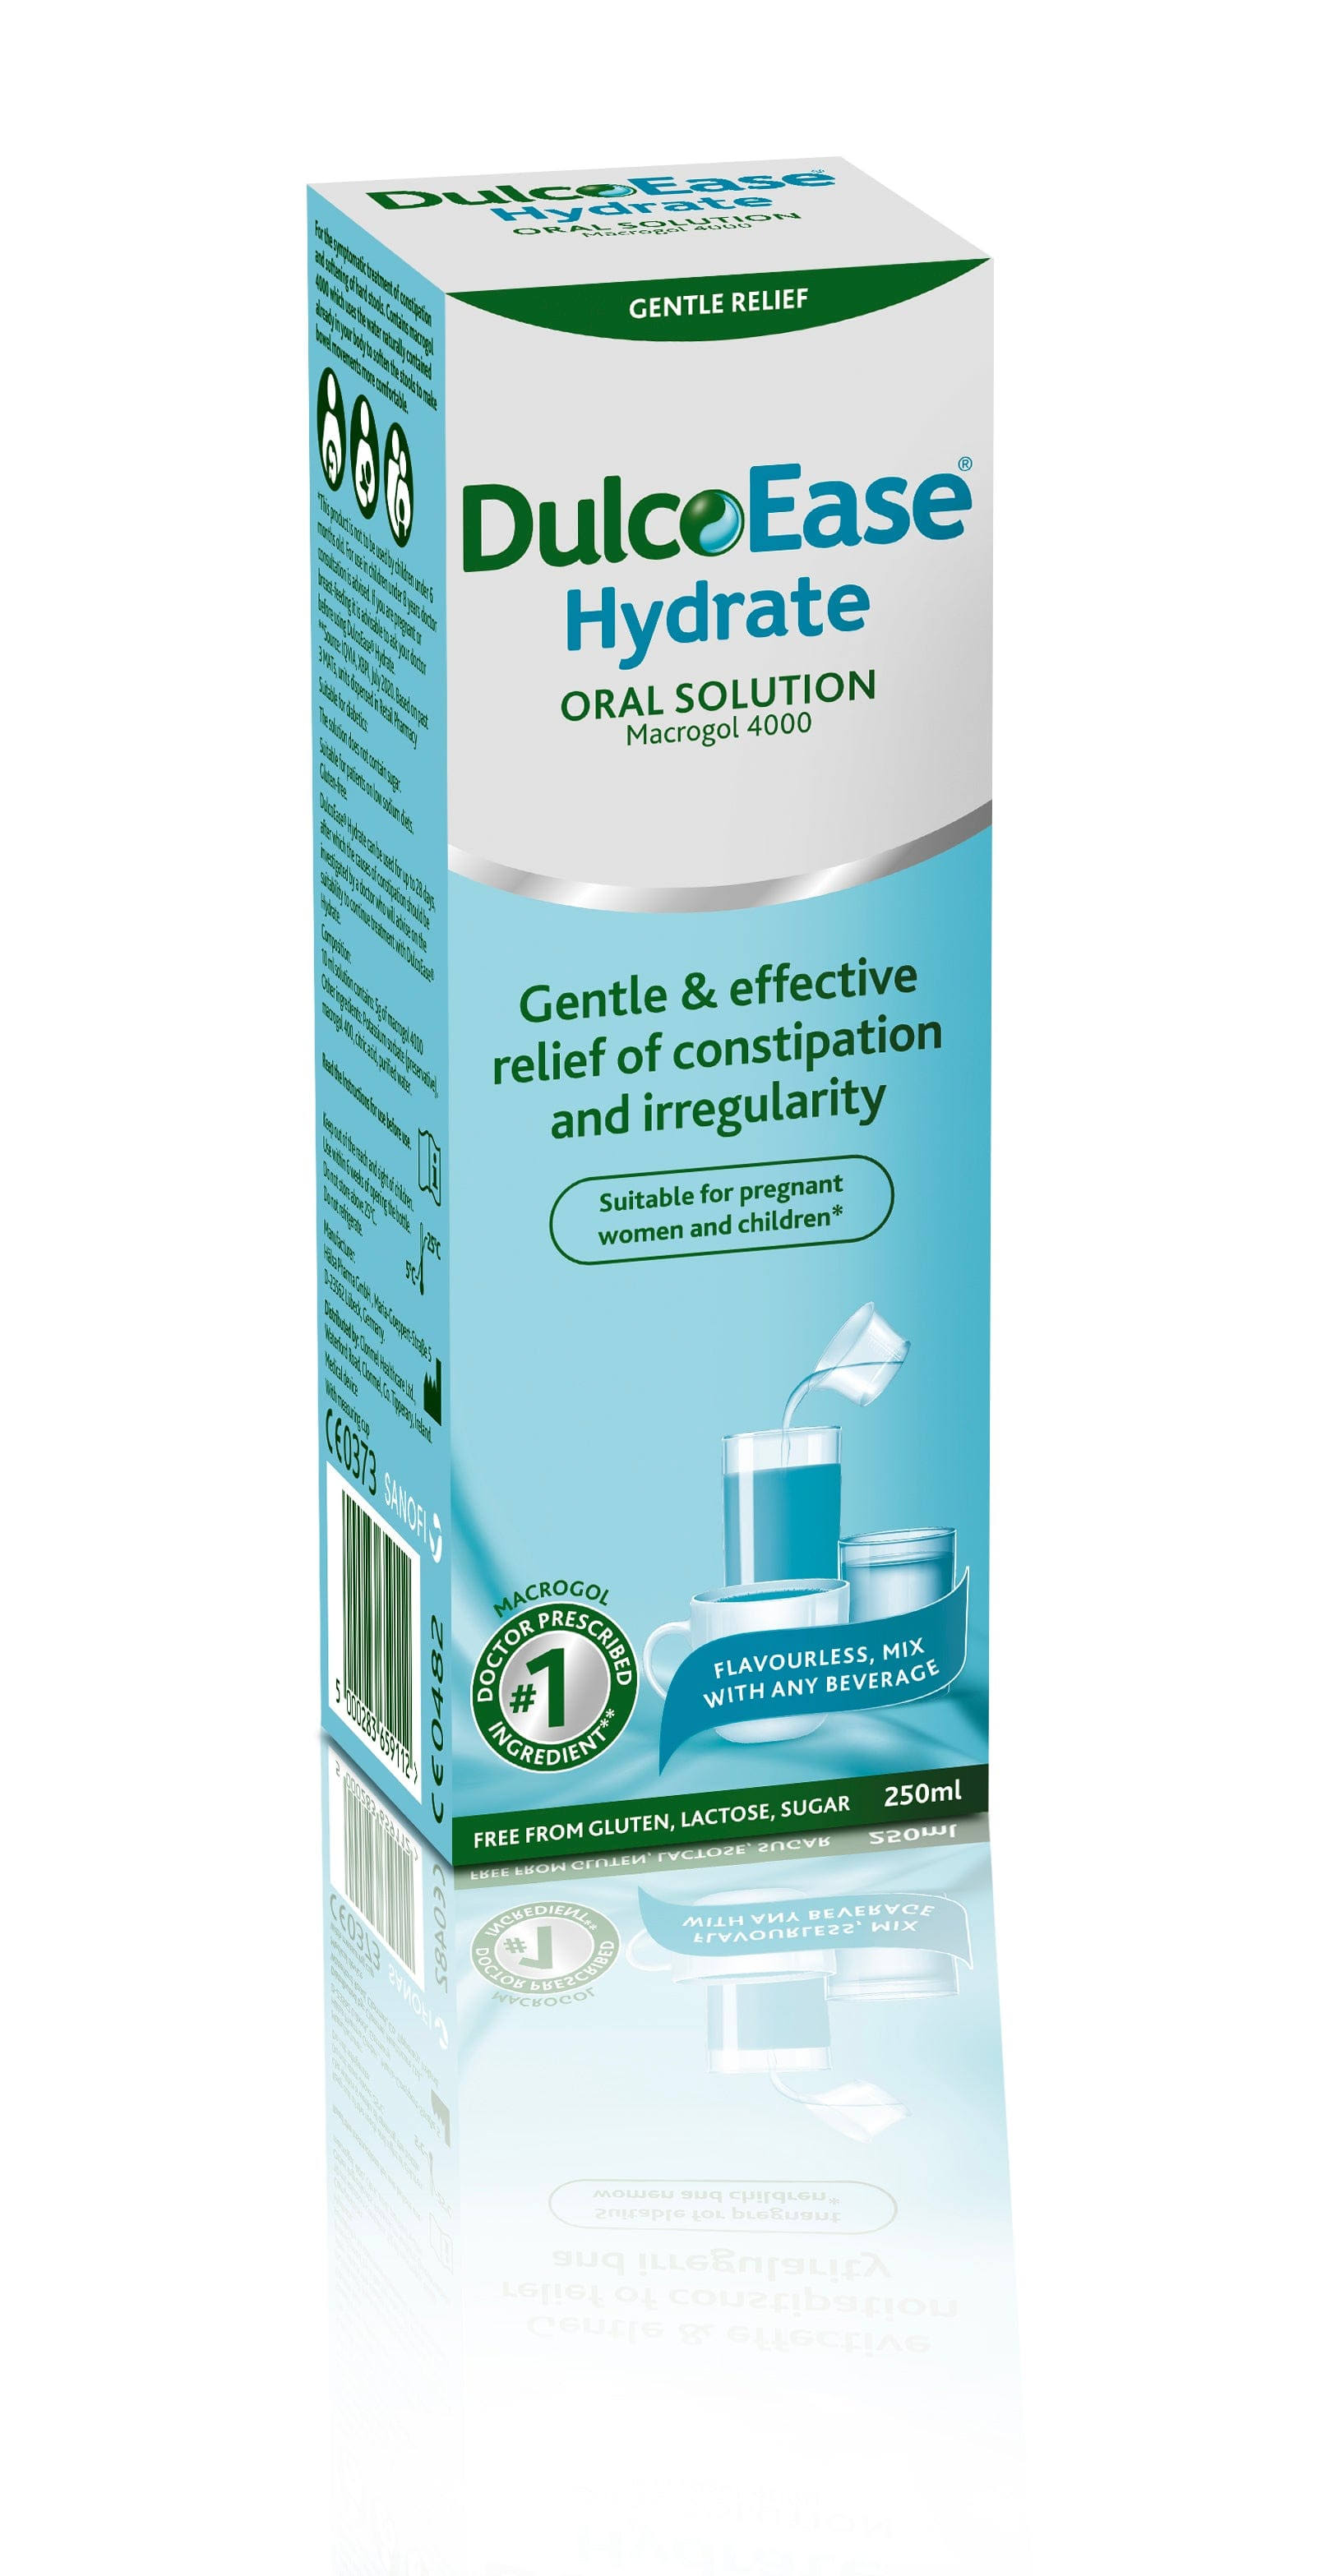 DulcoEase Hydrate (Dulcosoft) Oral Solution (250ml)